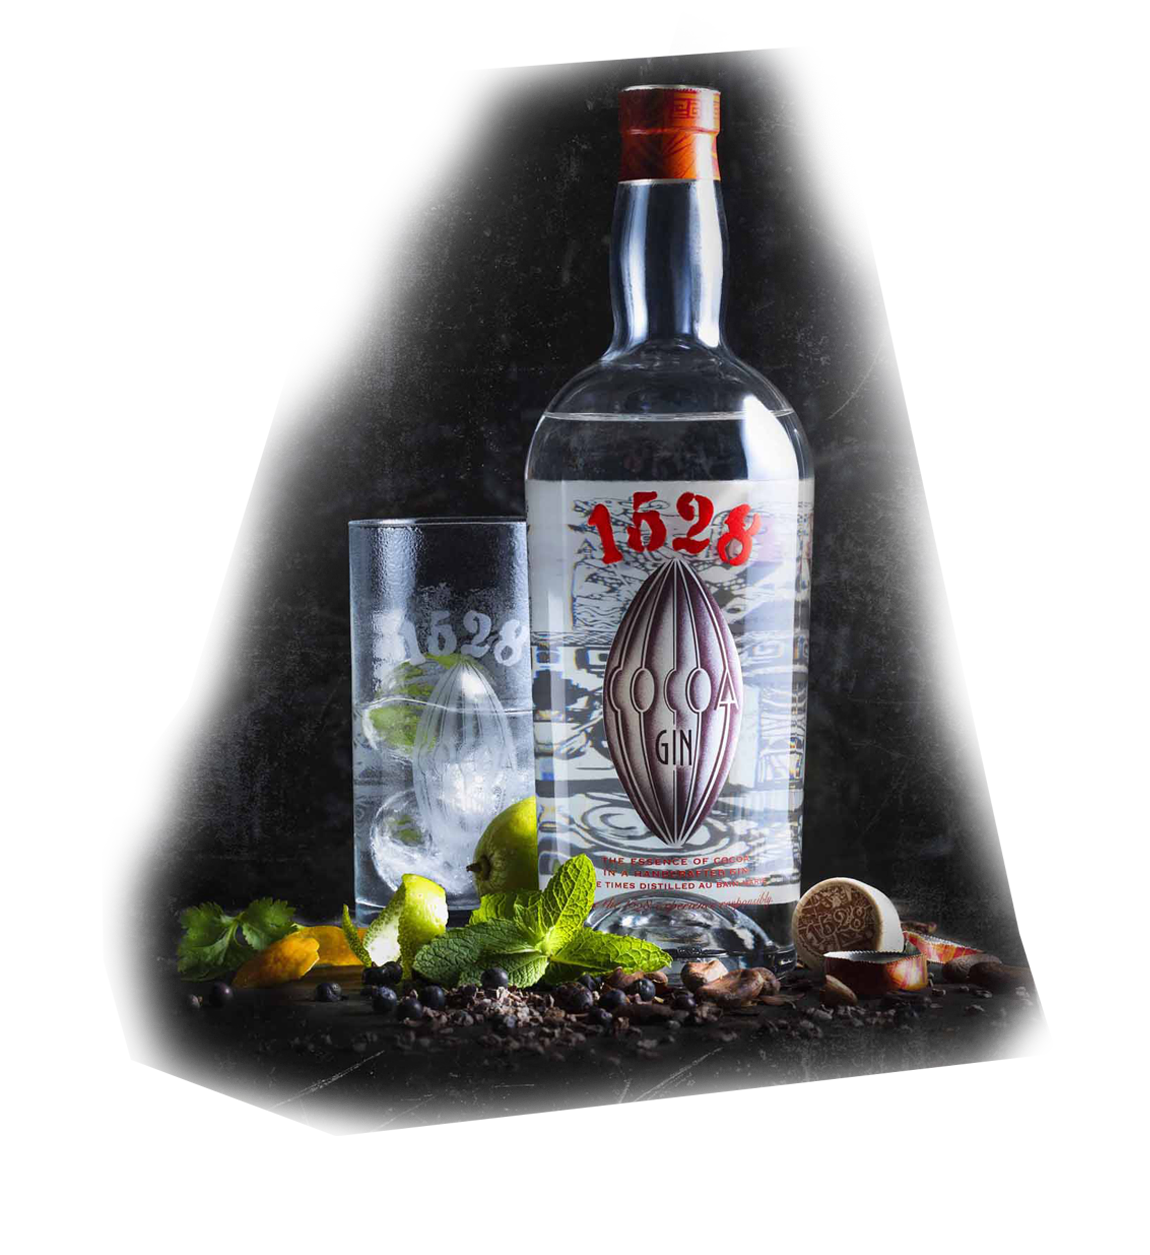 Cocoa Gin - 1528 drinks